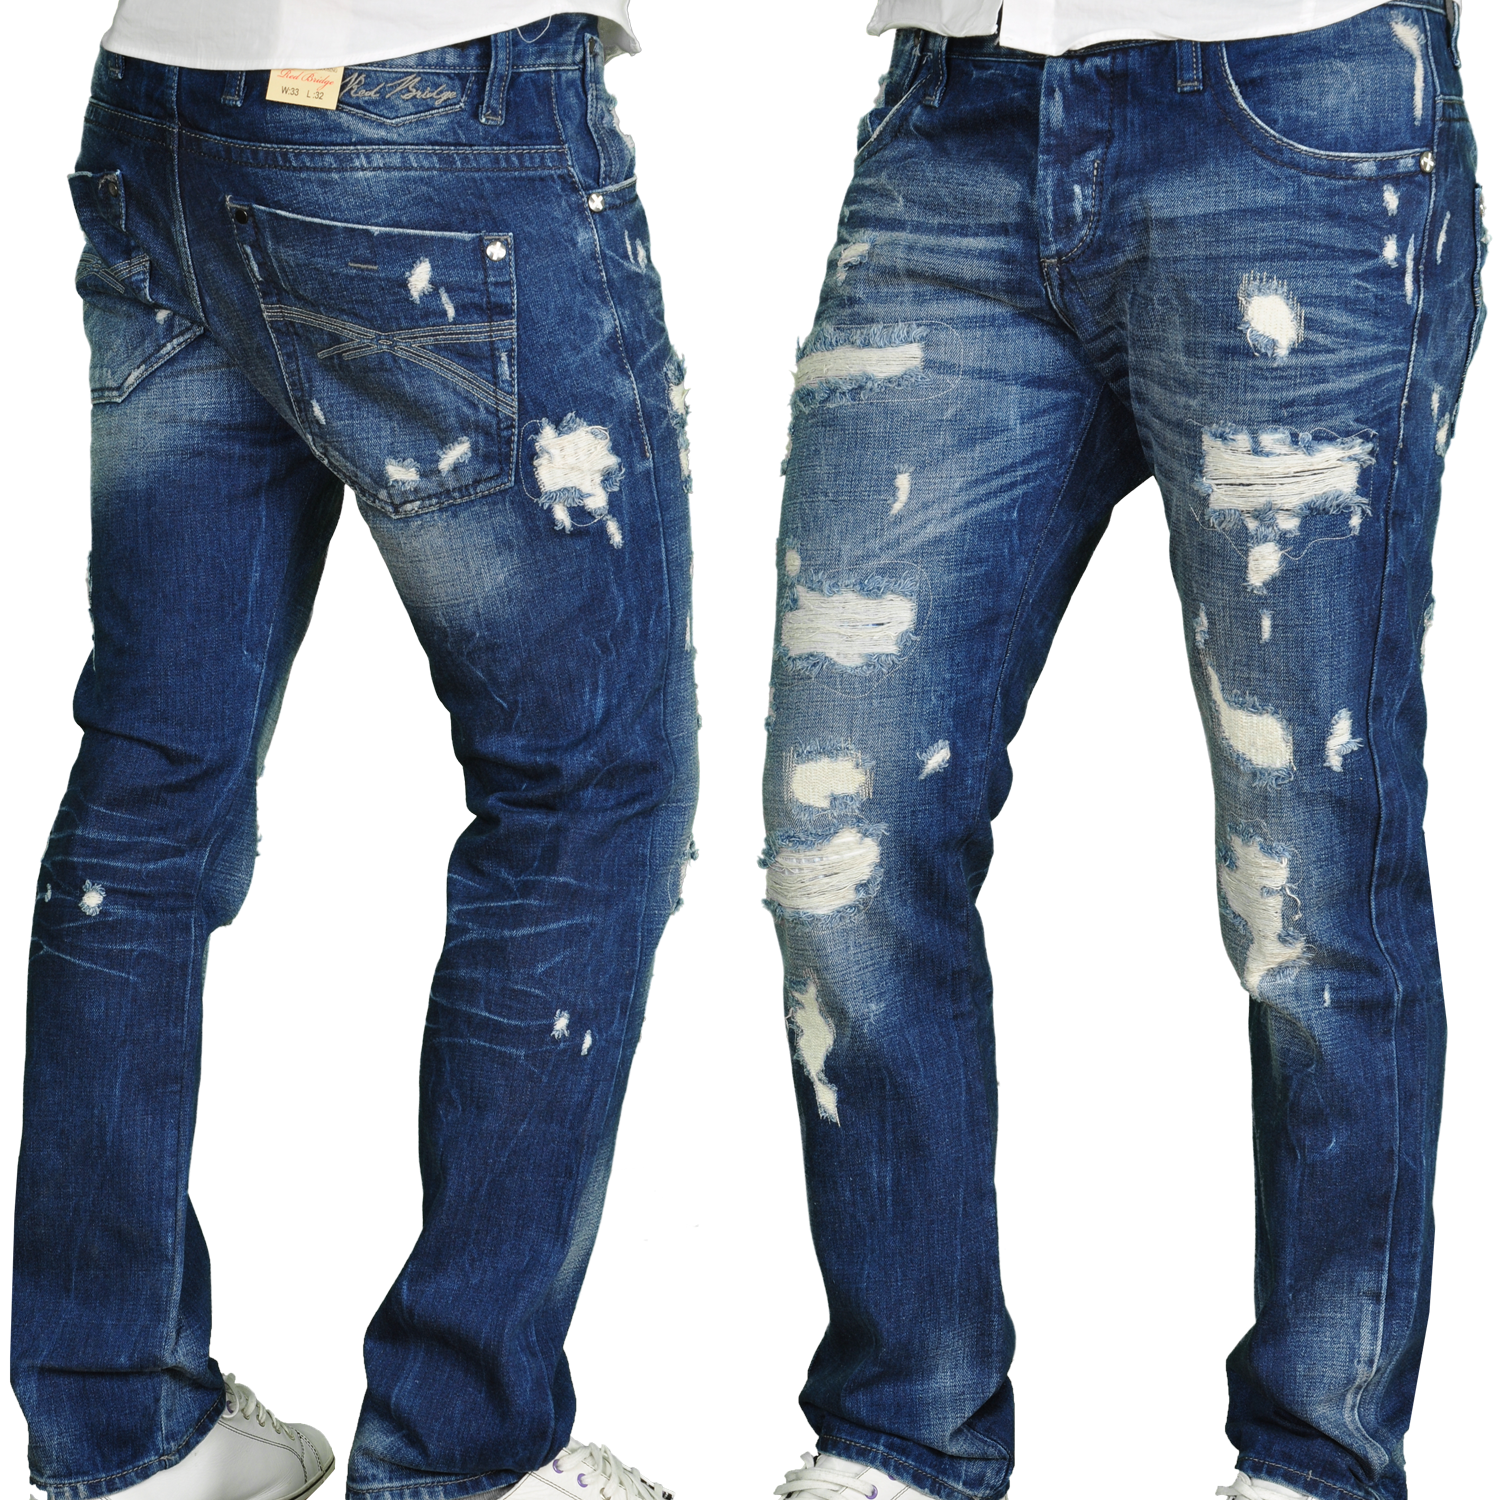 Jeans Background PNG Image